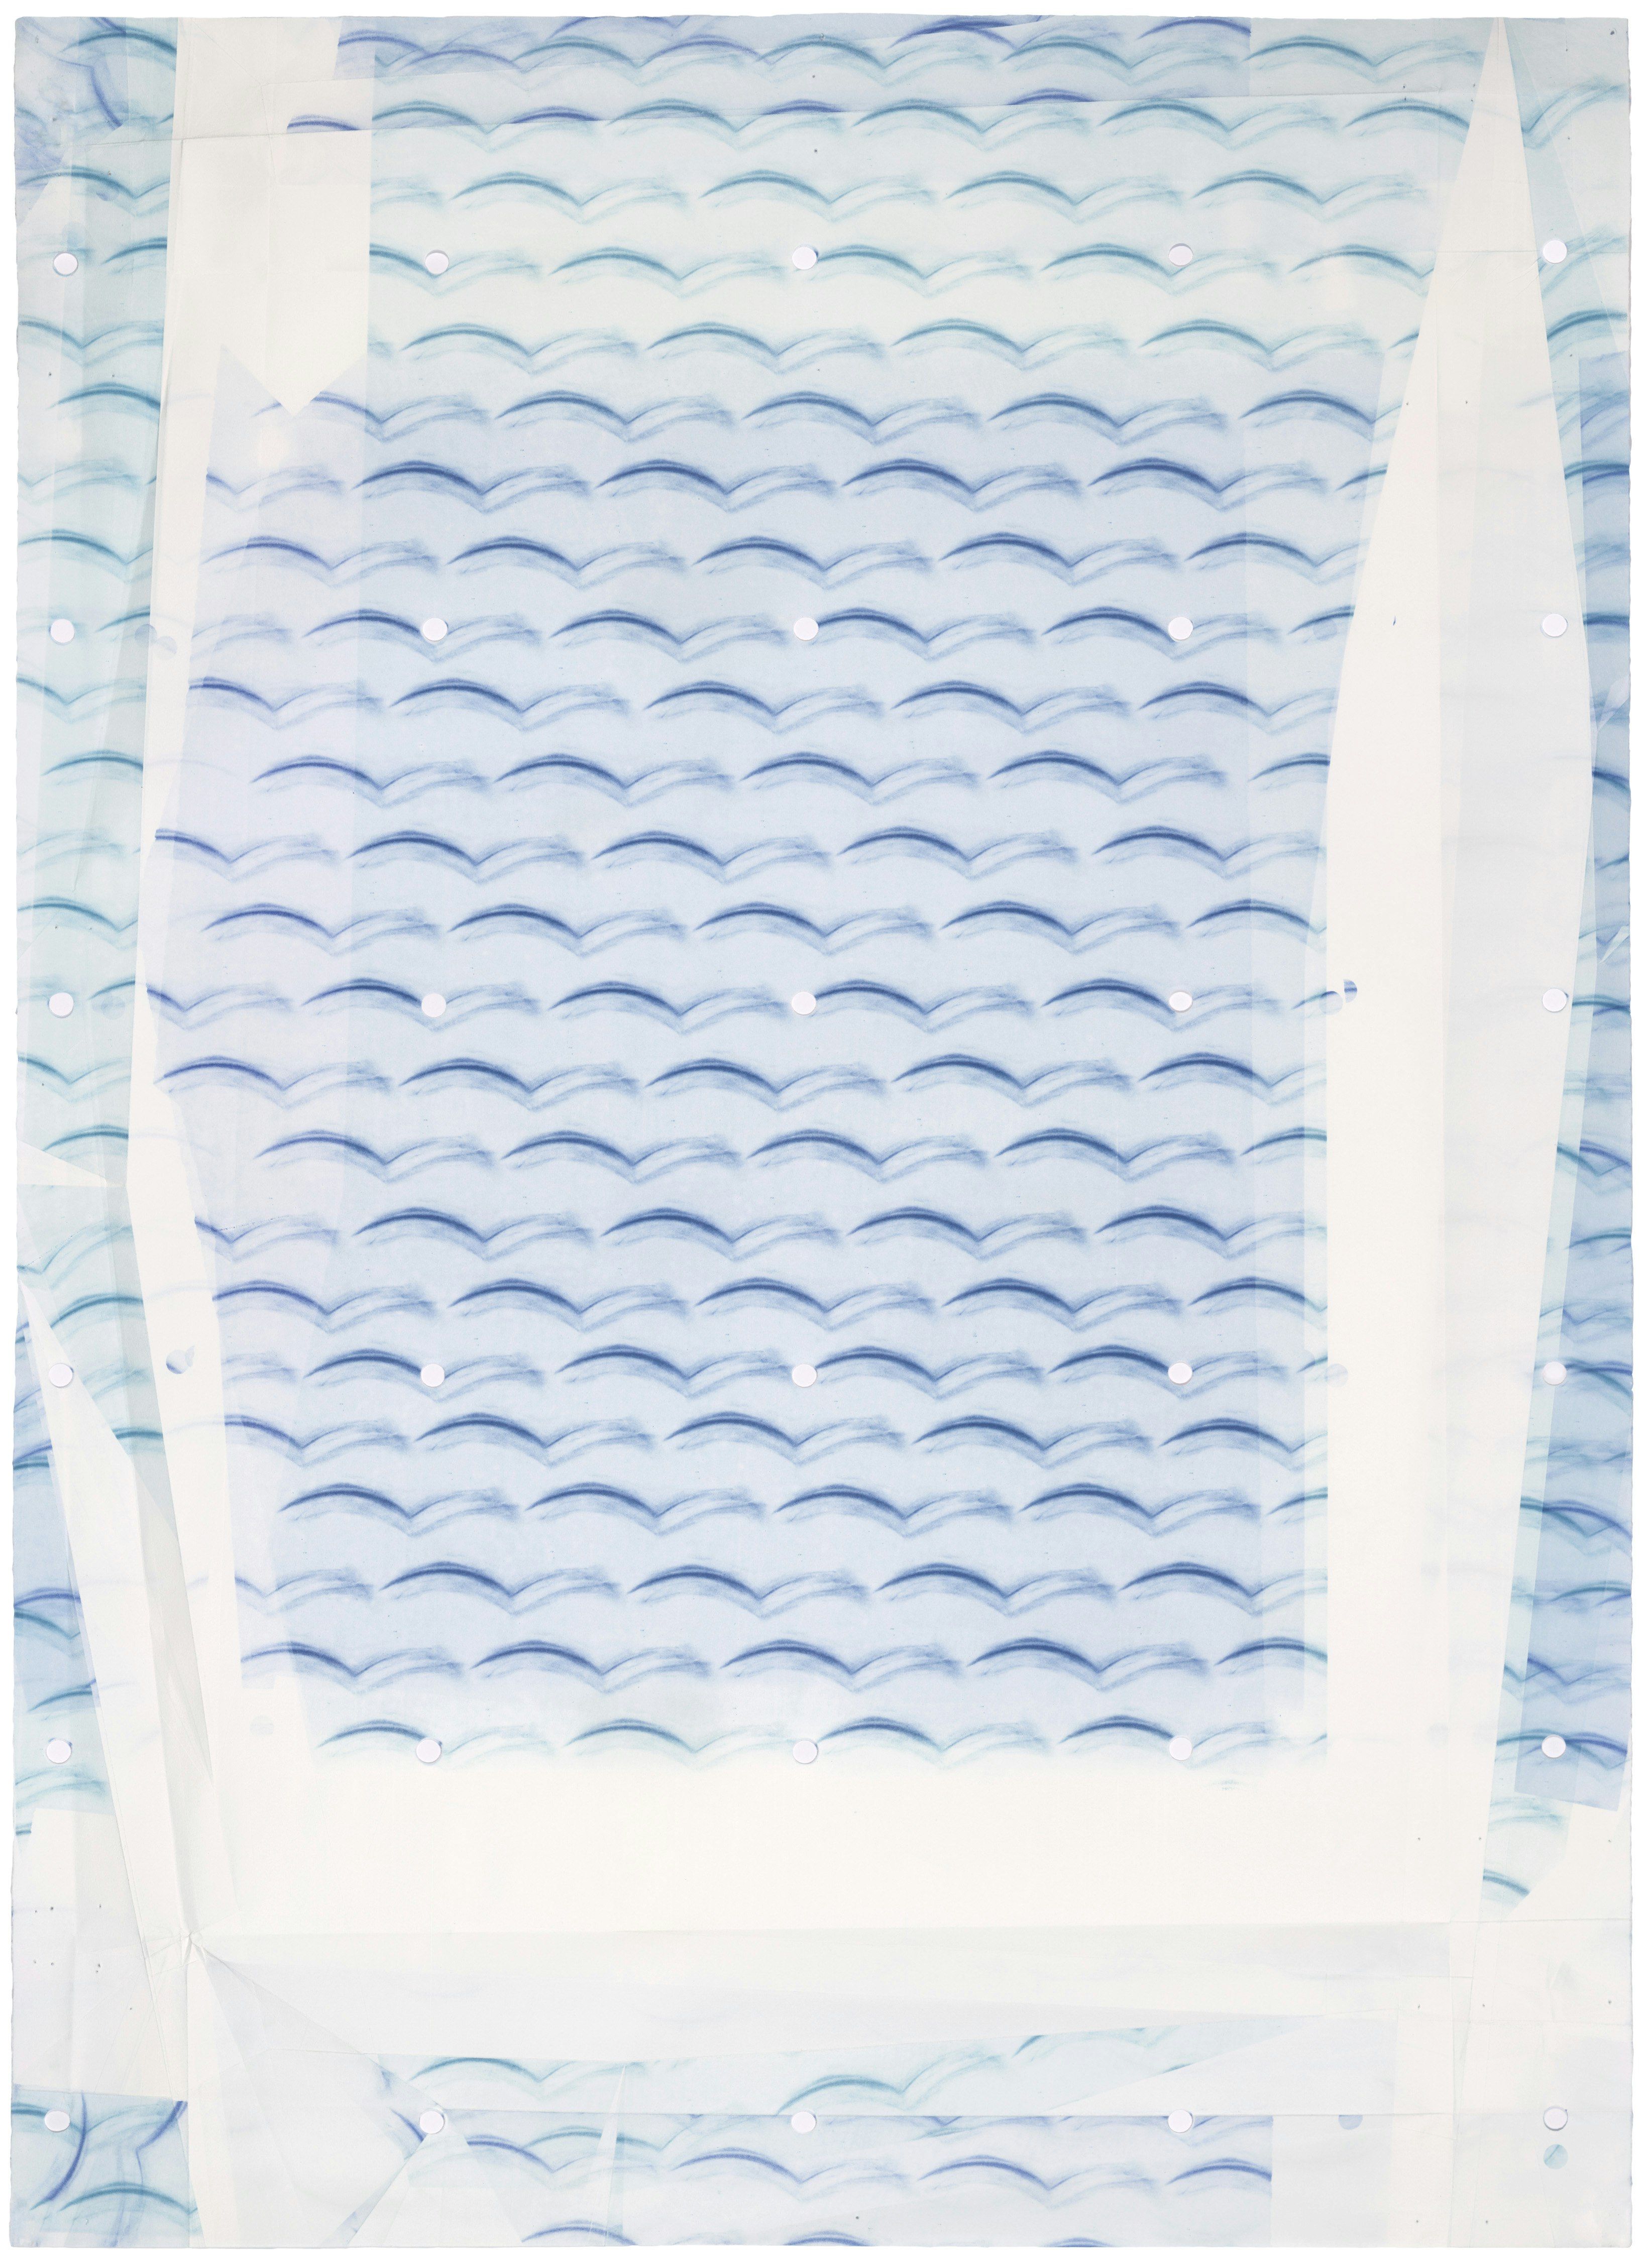 Julia Rommel, <em>Family Vacation</em>, 2015. Lithograph in 3 colors with die-cut on folded paper, 36 x 26 inches. Courtesy ULAE.